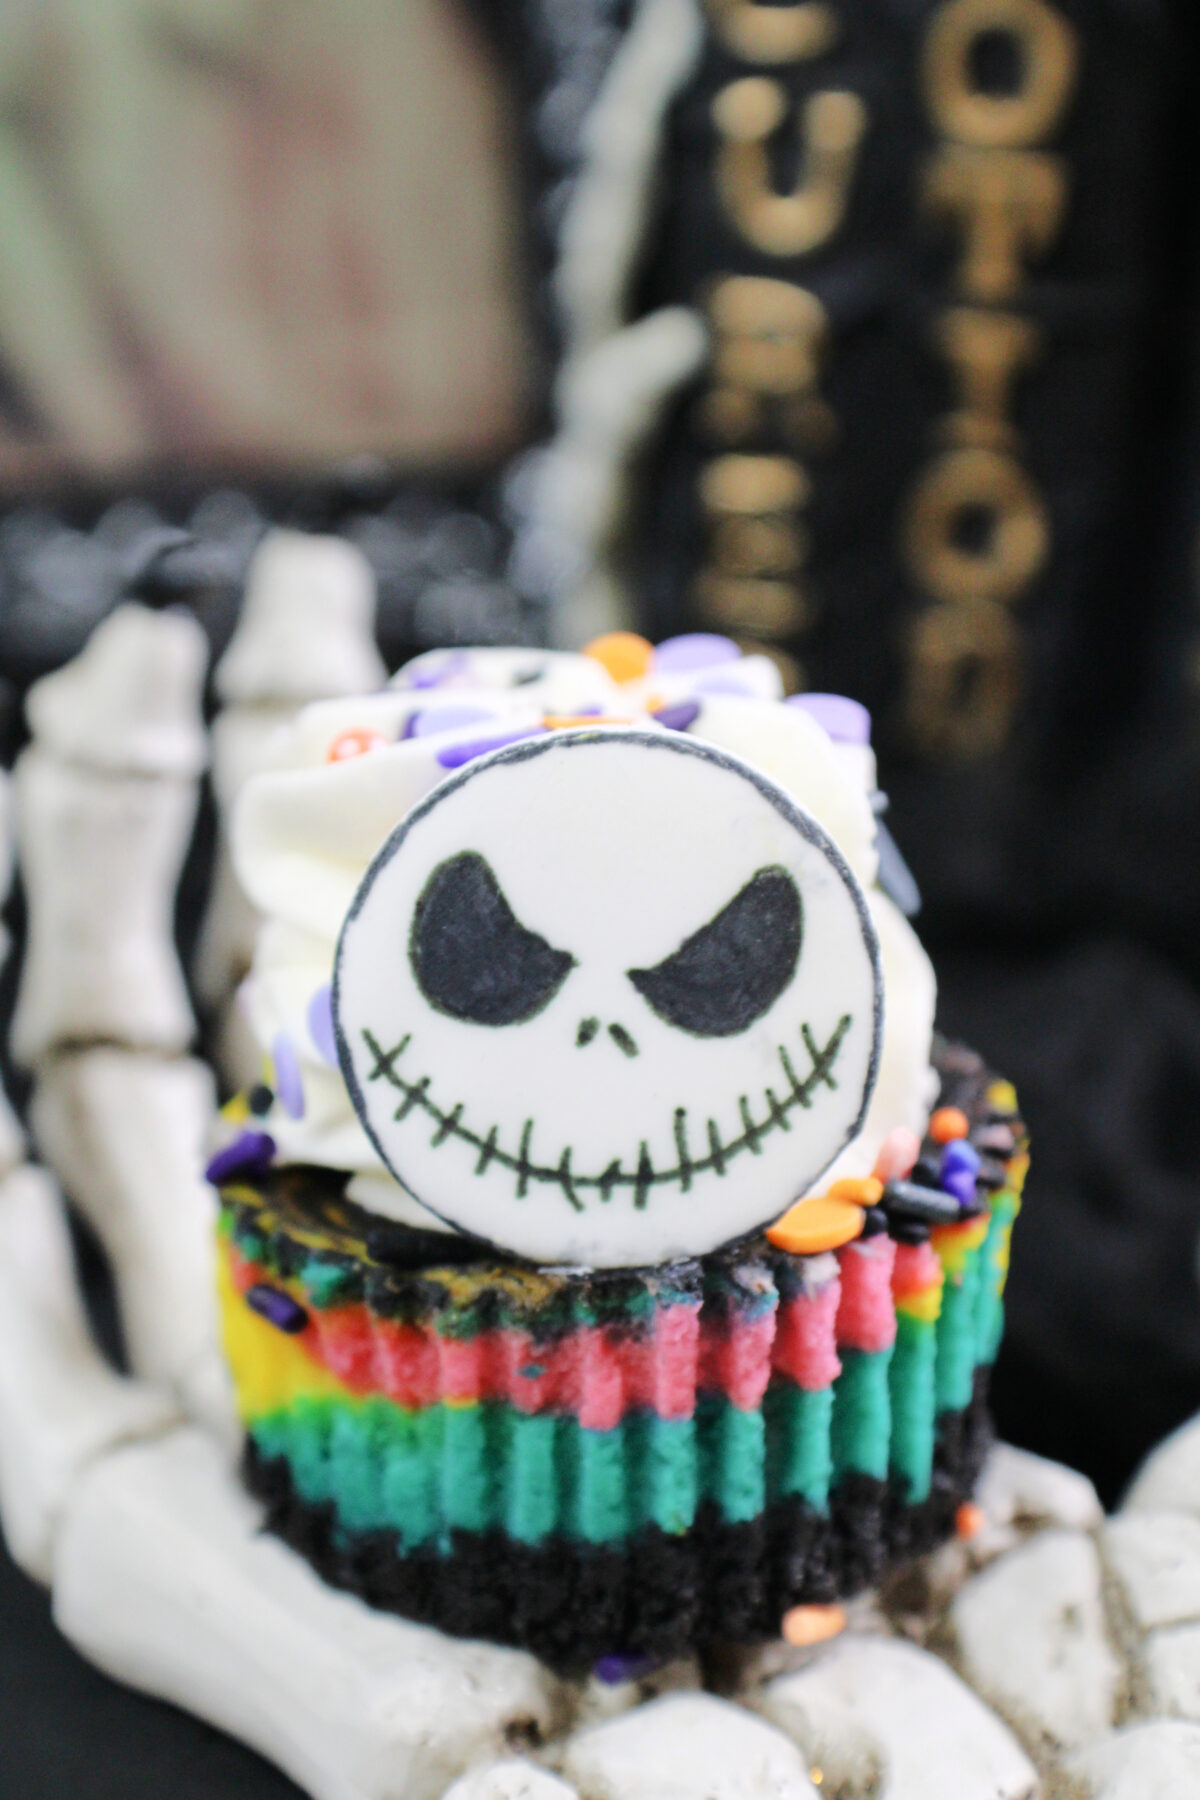 Looking for the perfect Halloween treat? Try these deliciously spooky Nightmare Before Christmas-inspired cheesecakes.